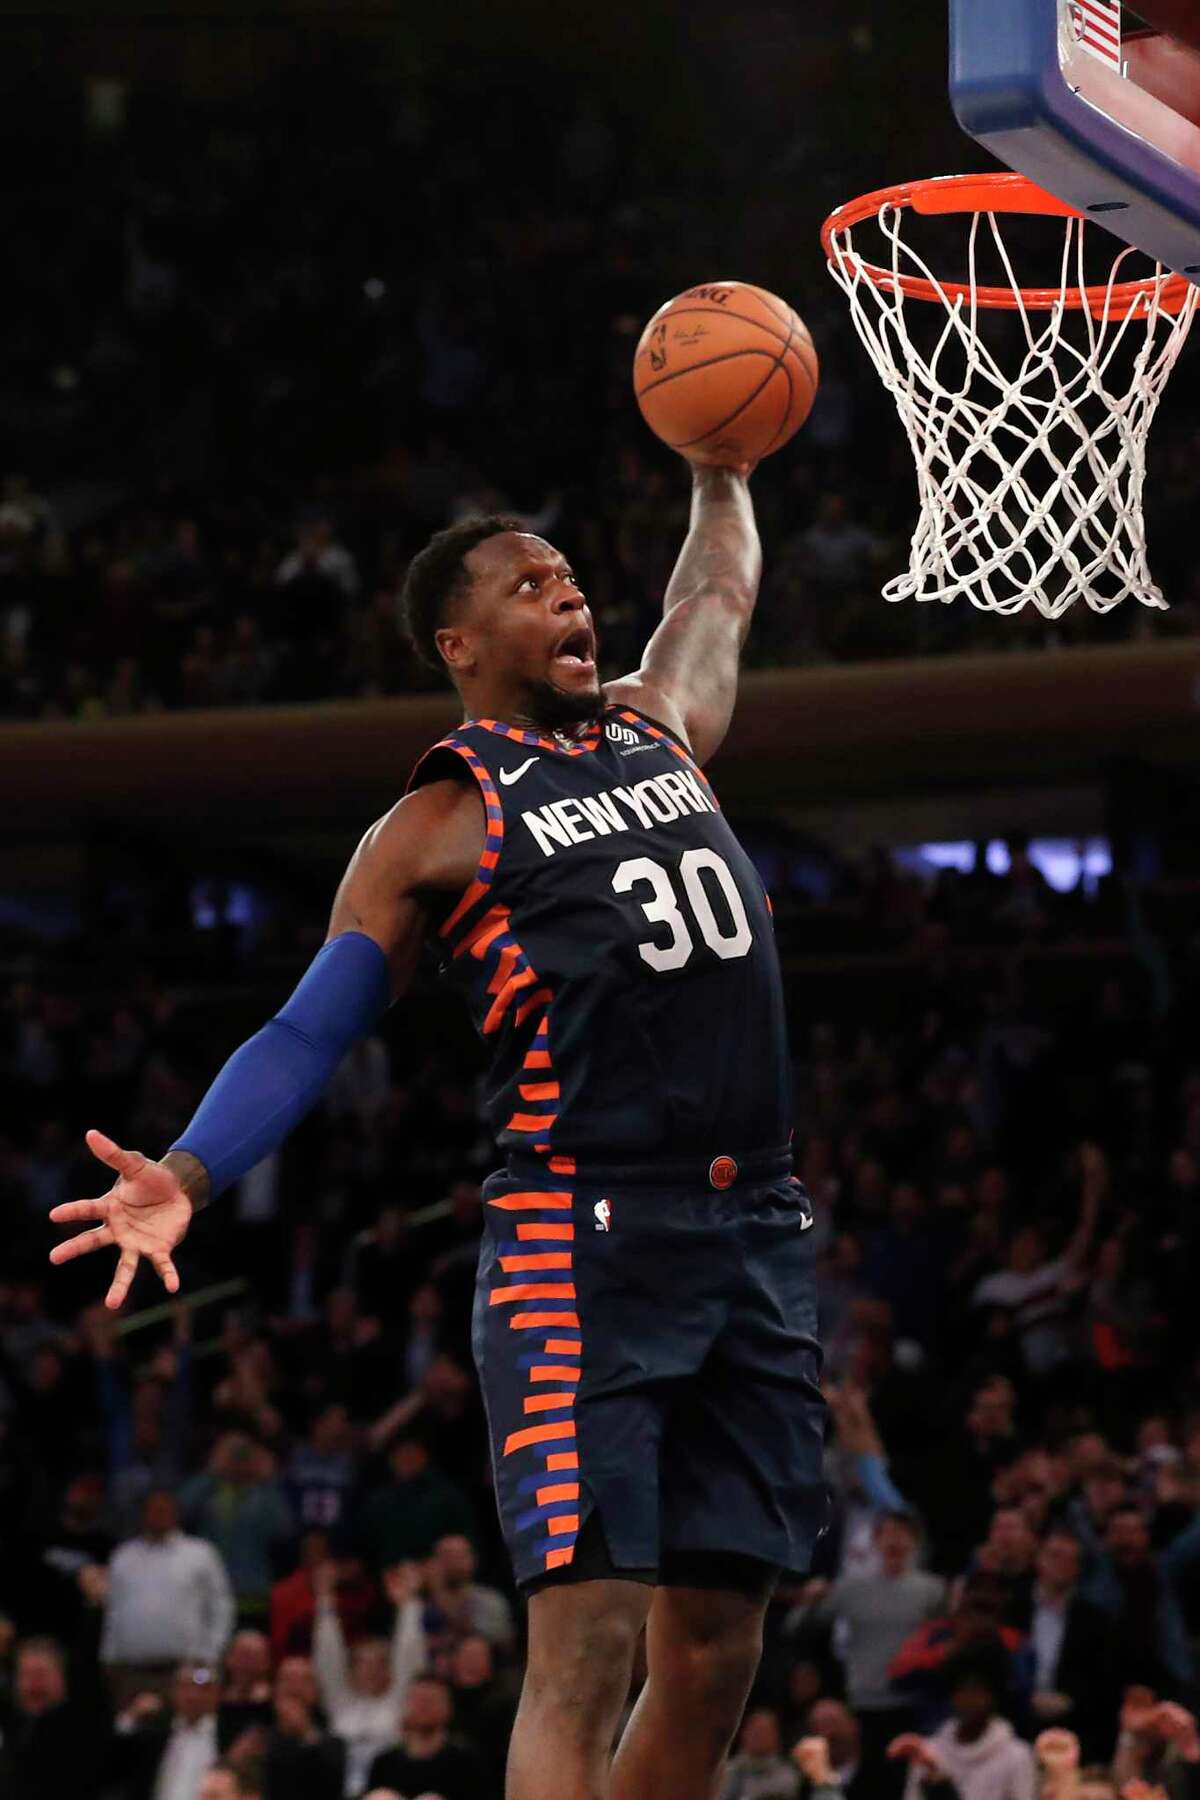 New York Knicks forward Julius Randle makes a slam dunk after the buzzer against the Orlando Magic during the second half of an NBA basketball game, Thursday, Feb. 6, 2020, in New York. (AP Photo/Michael Owens)